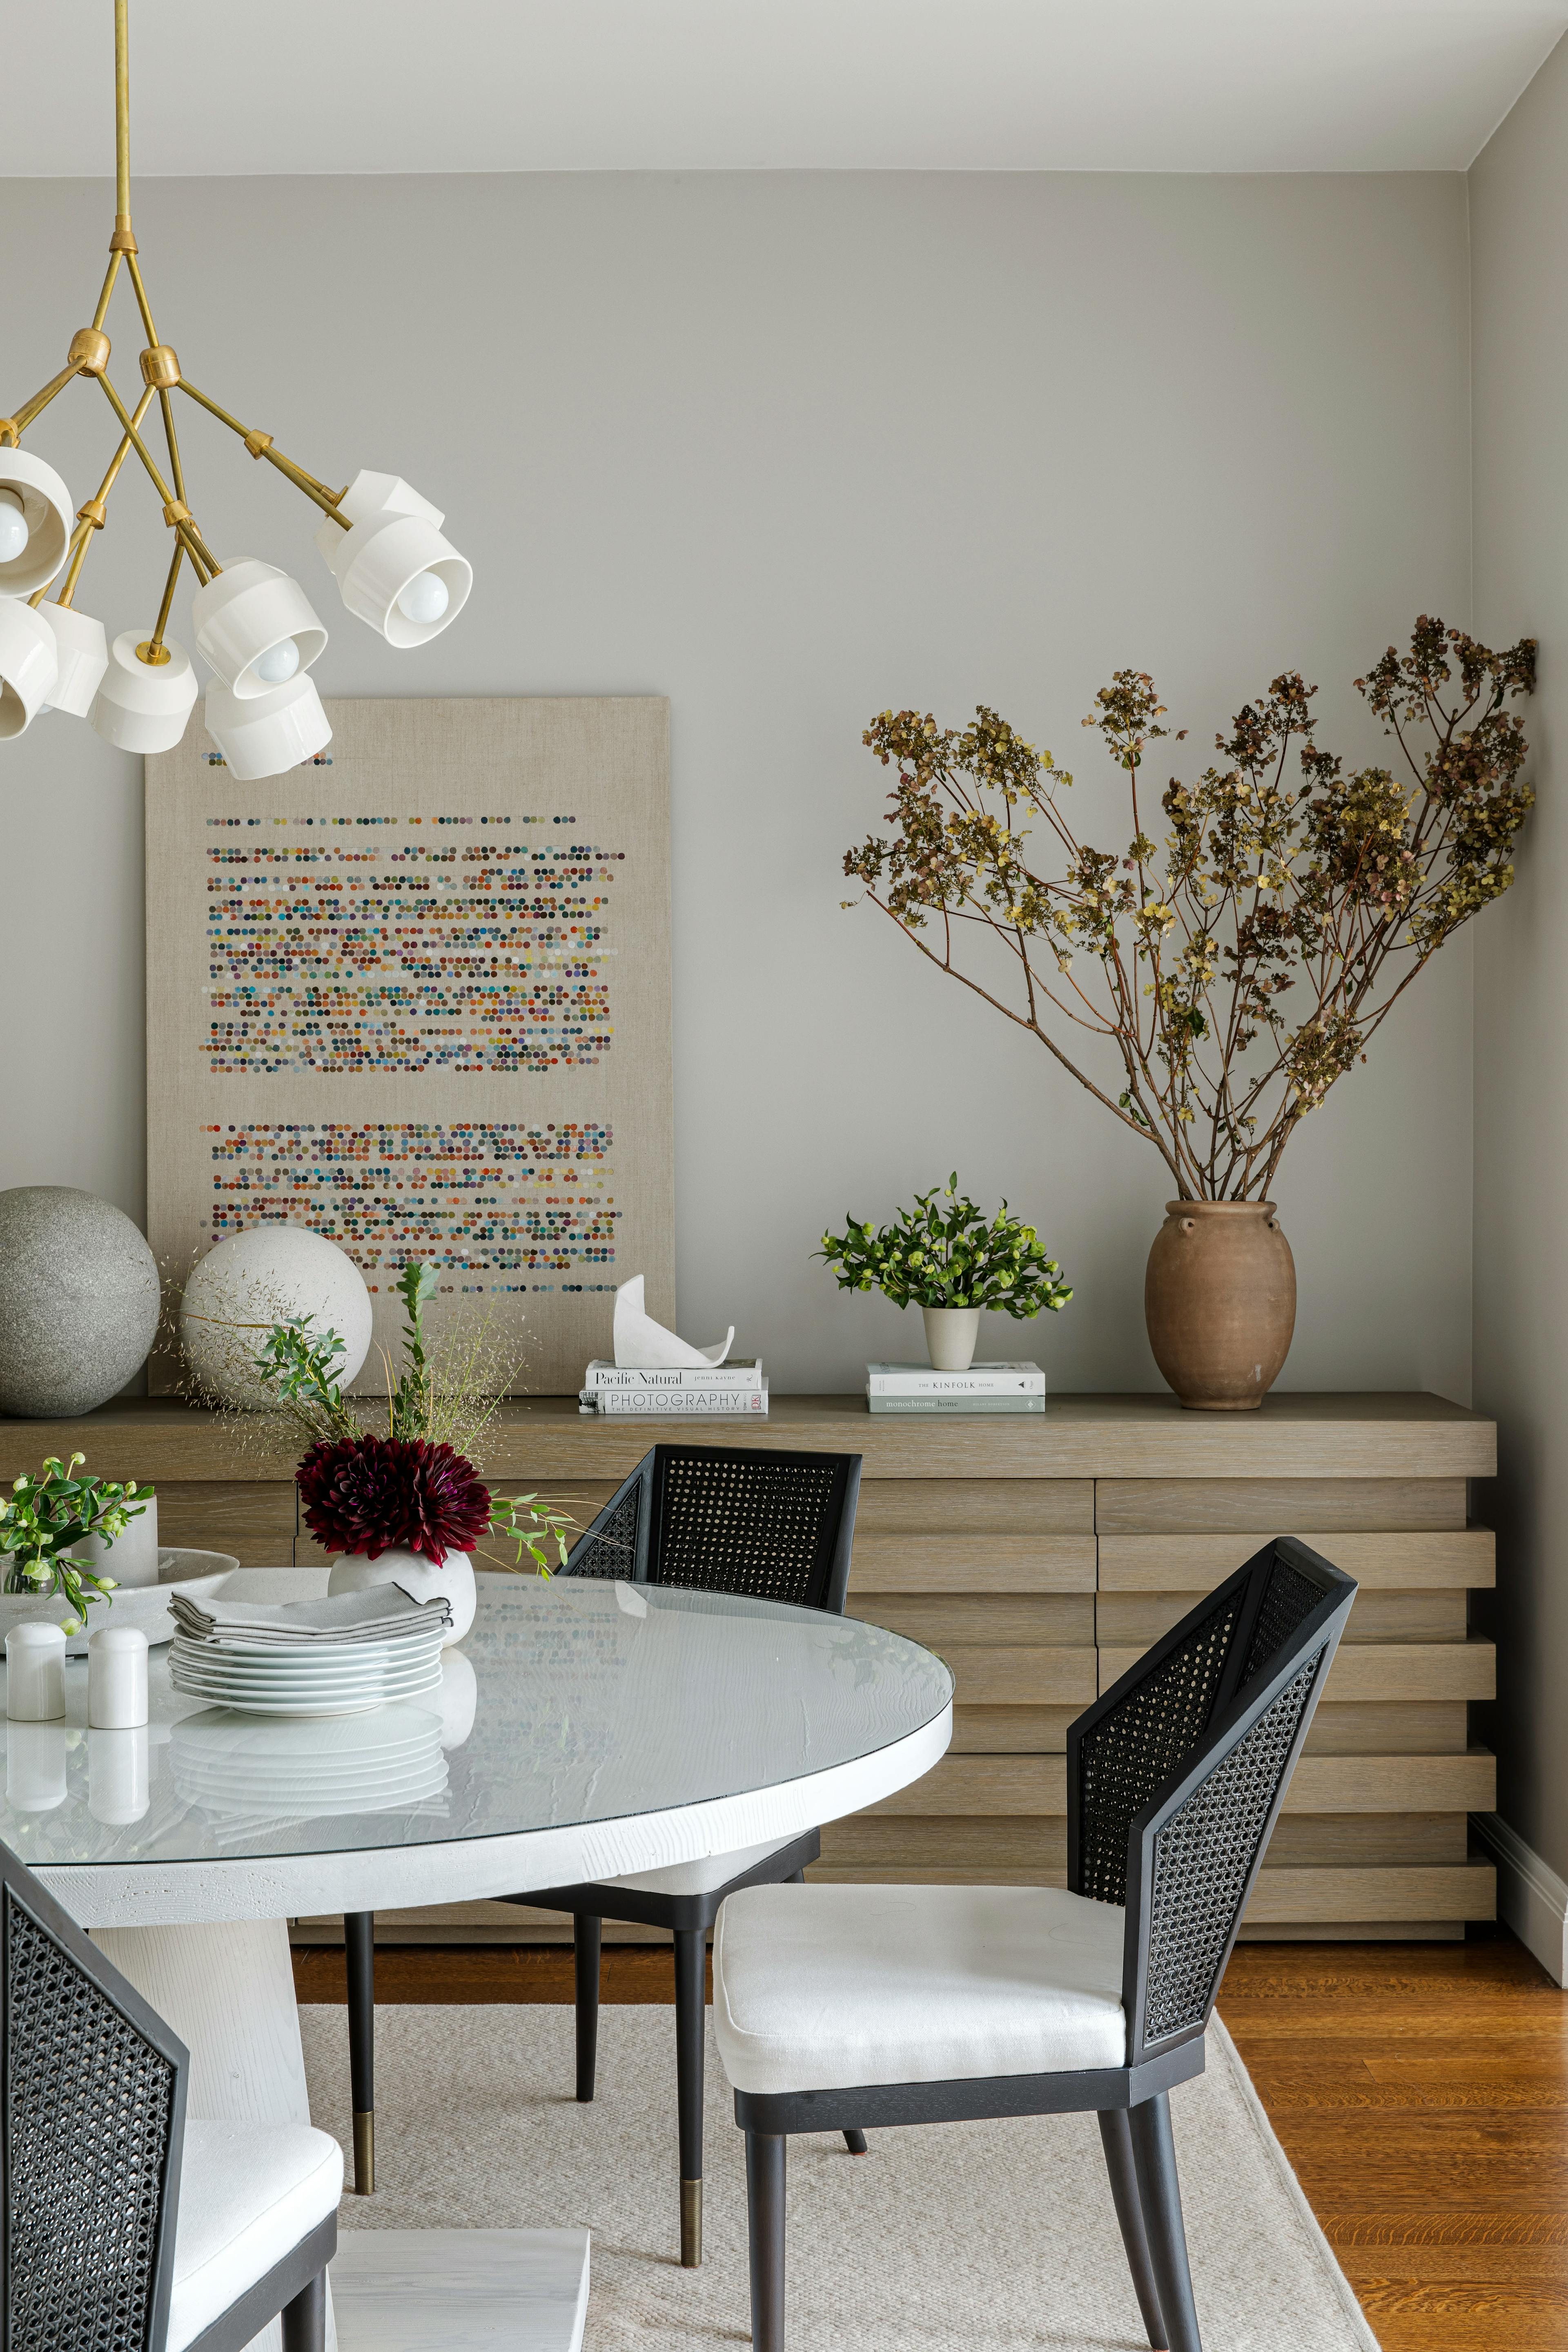 Abstract artwork with coded language by artist Gail Tarantino in a modern dining room.